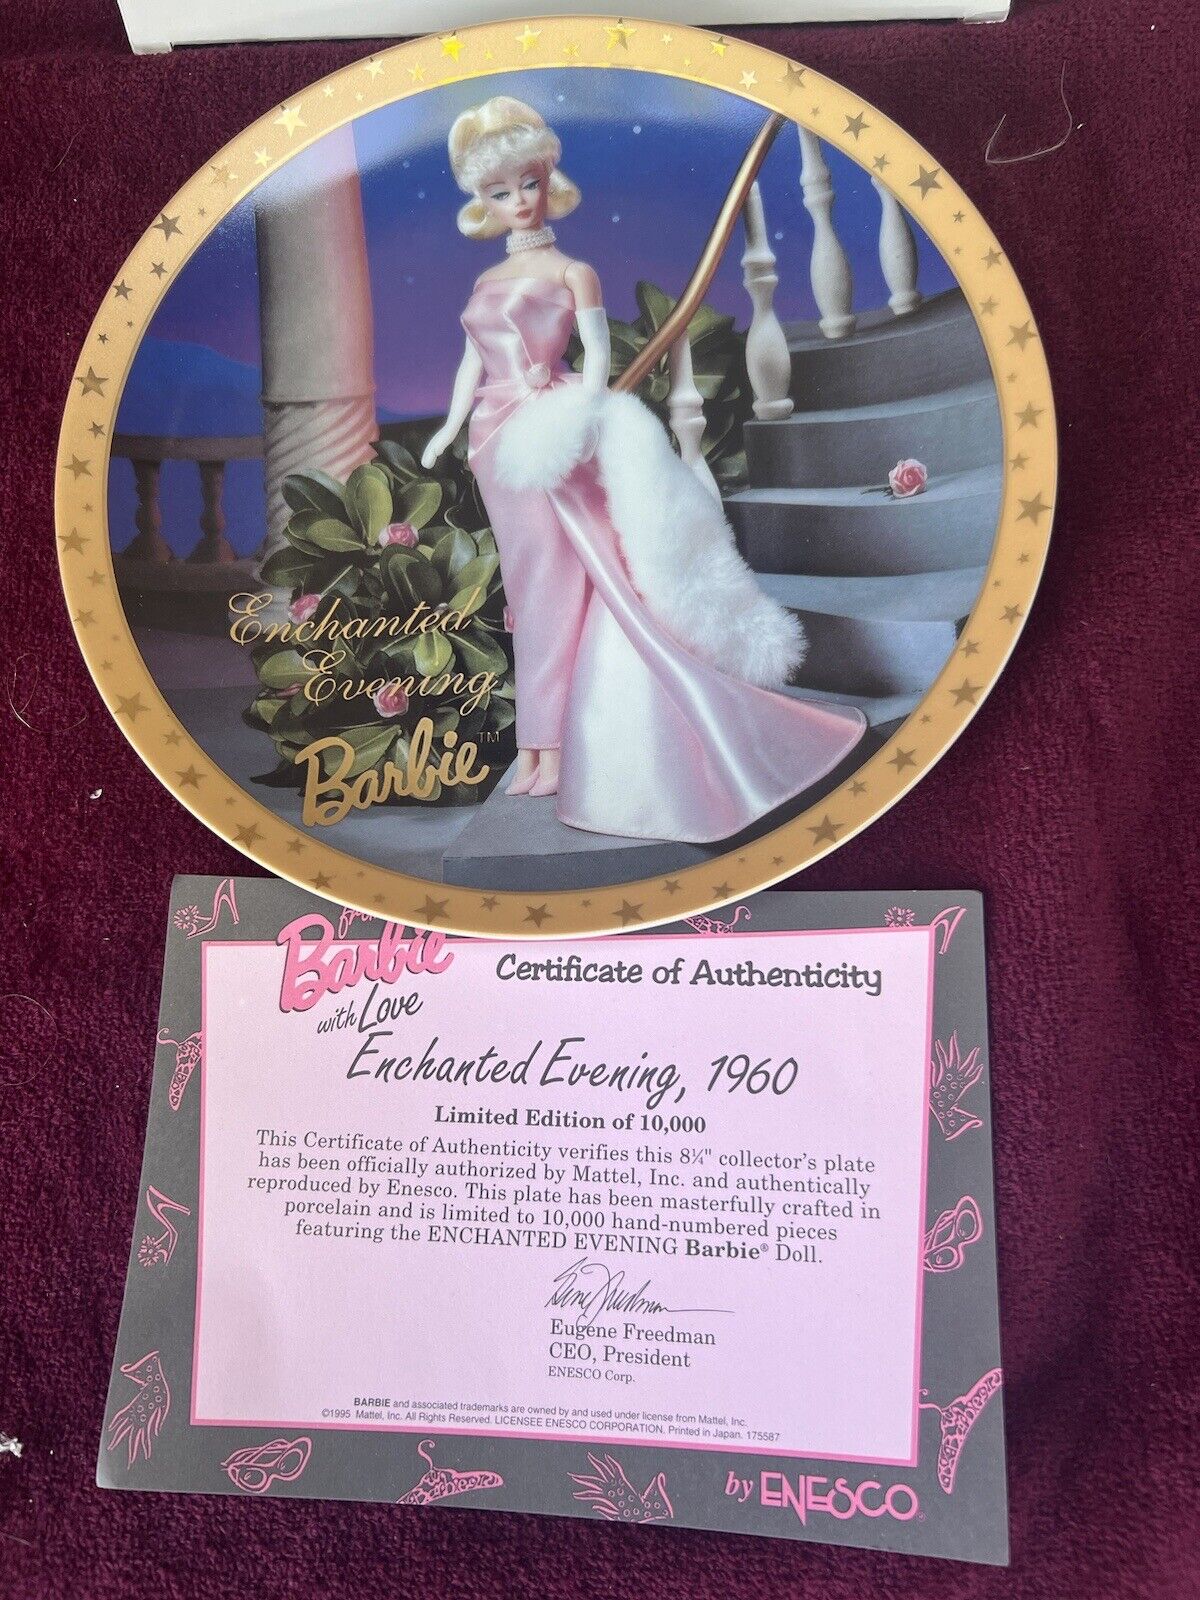 #32 barbie collector plates Enchanted Evening 1960 Limited Edition 8,026/ 10,000